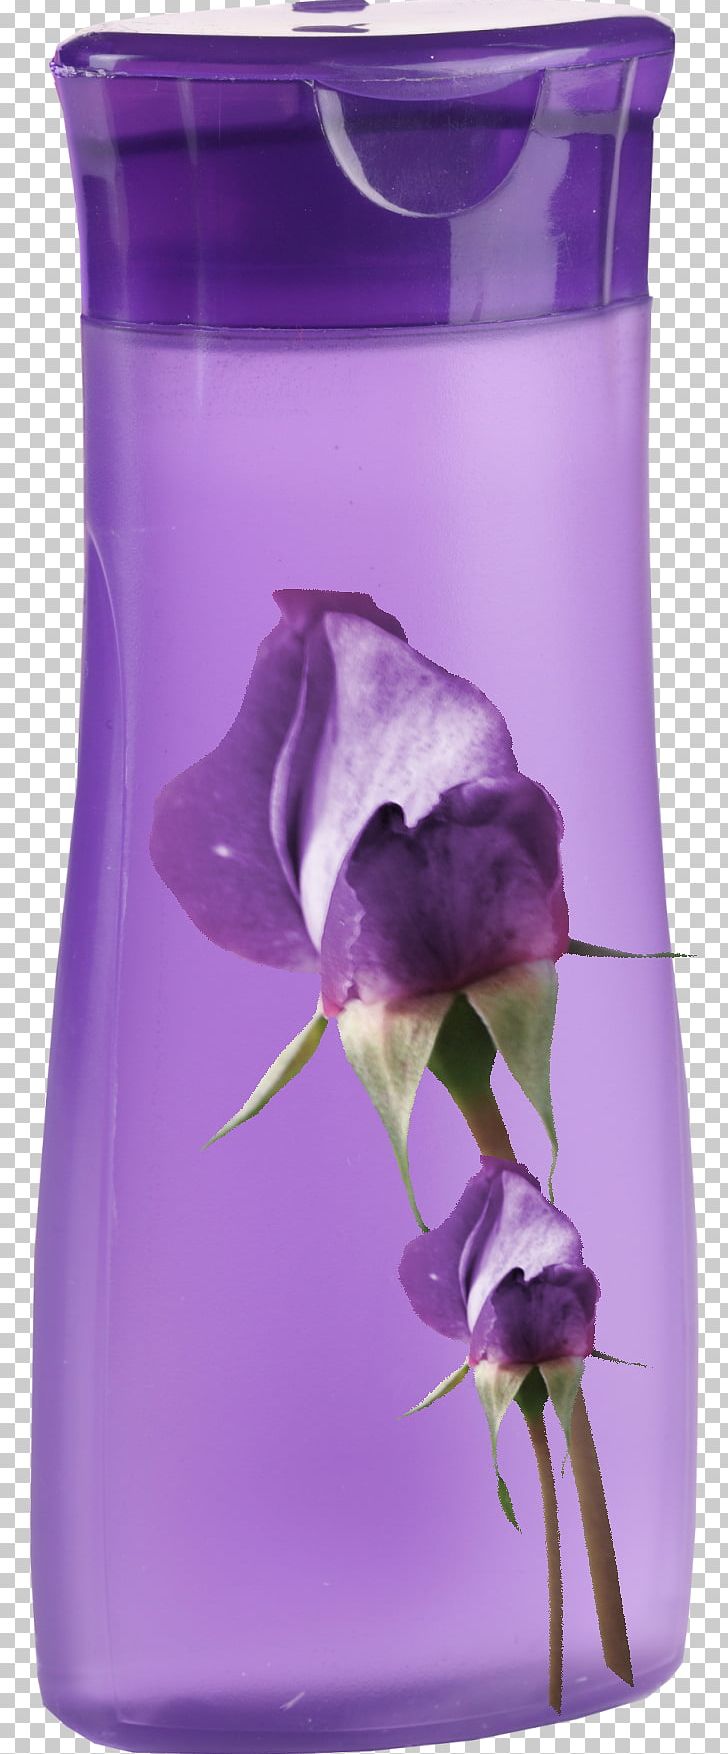 Purple Shower Gel PNG, Clipart, Ceramic, Cosmetics, Download, Flower, Frame Free Vector Free PNG Download